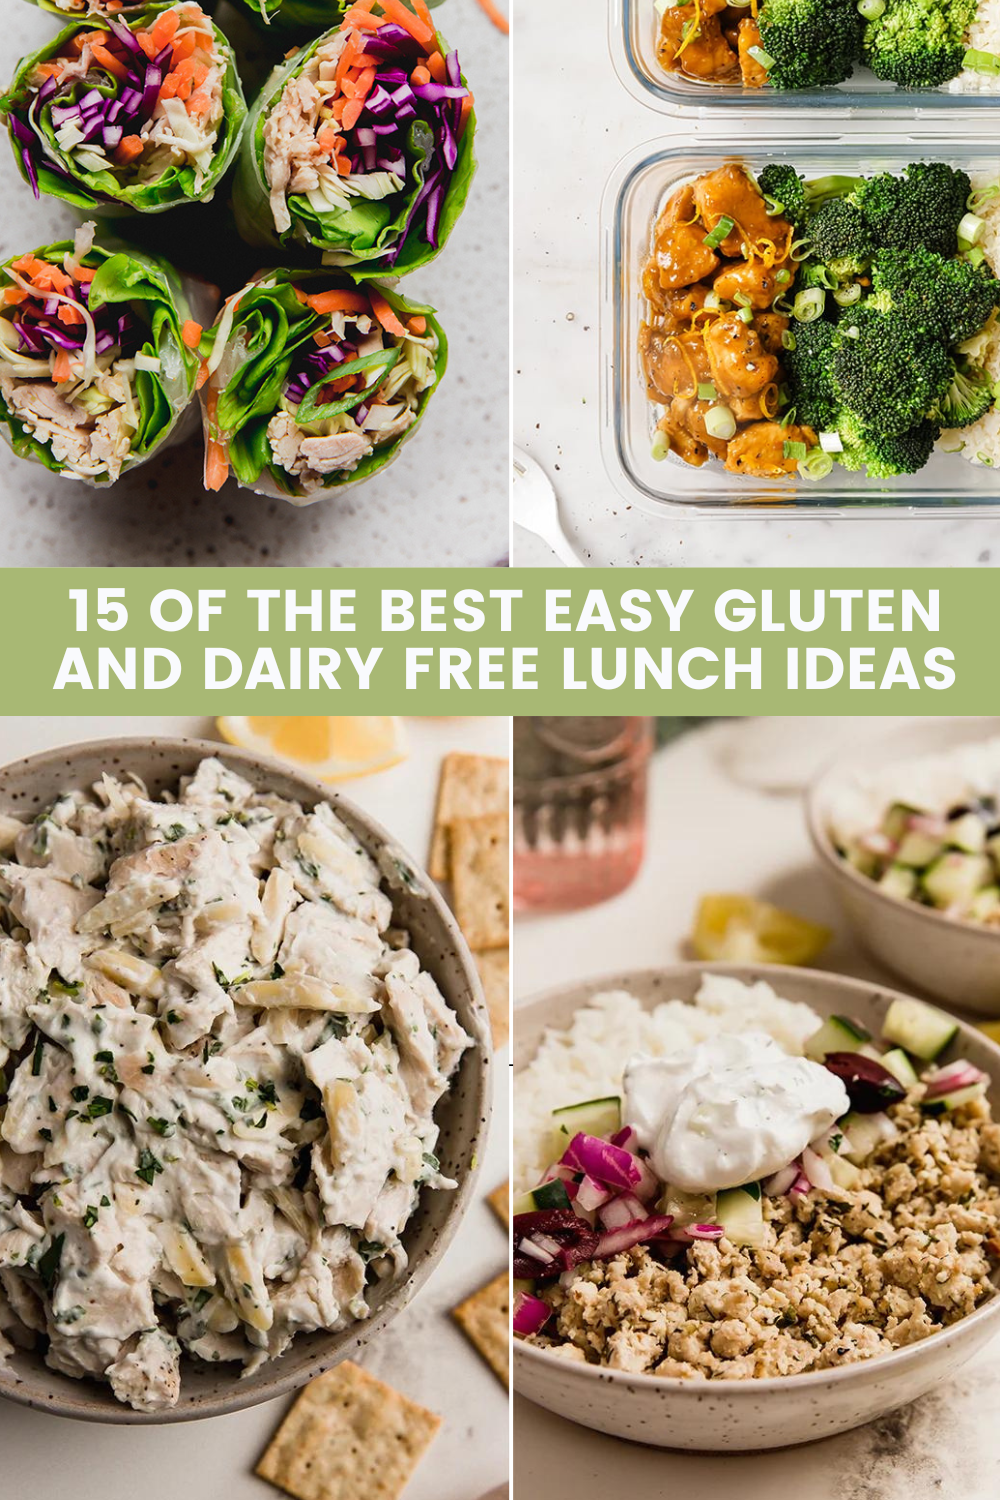 https://unboundwellness.com/wp-content/uploads/2023/08/15-of-the-Best-Easy-Gluten-and-Dairy-Free-Lunch-Ideas-1.png